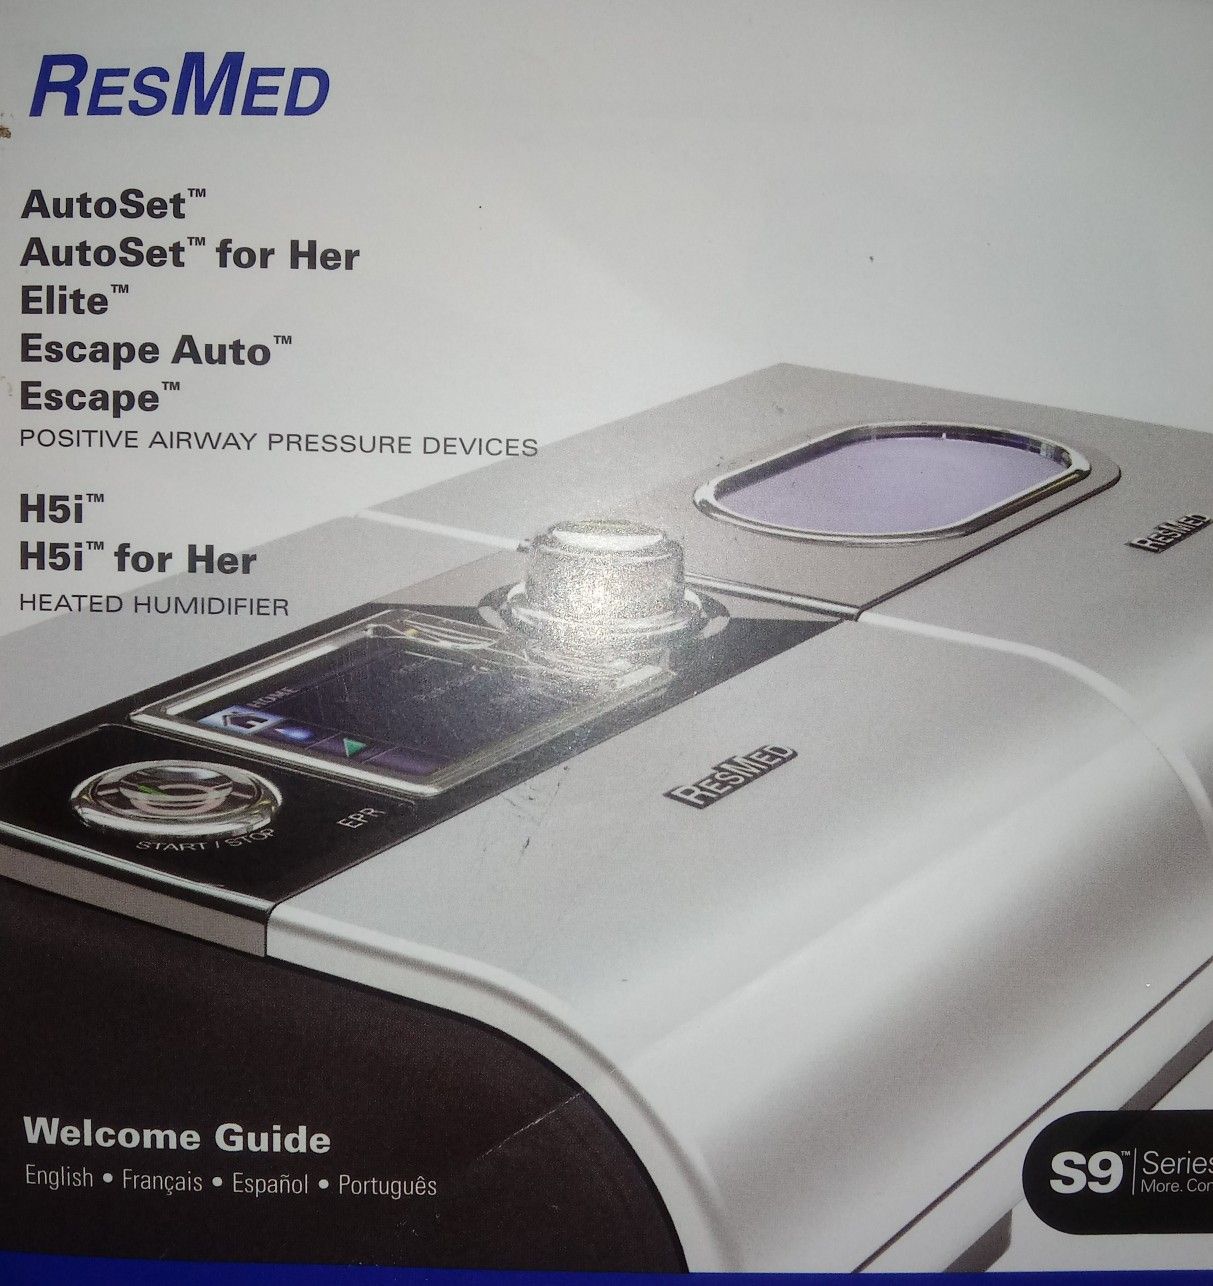 Cpap machine and heated humidifier